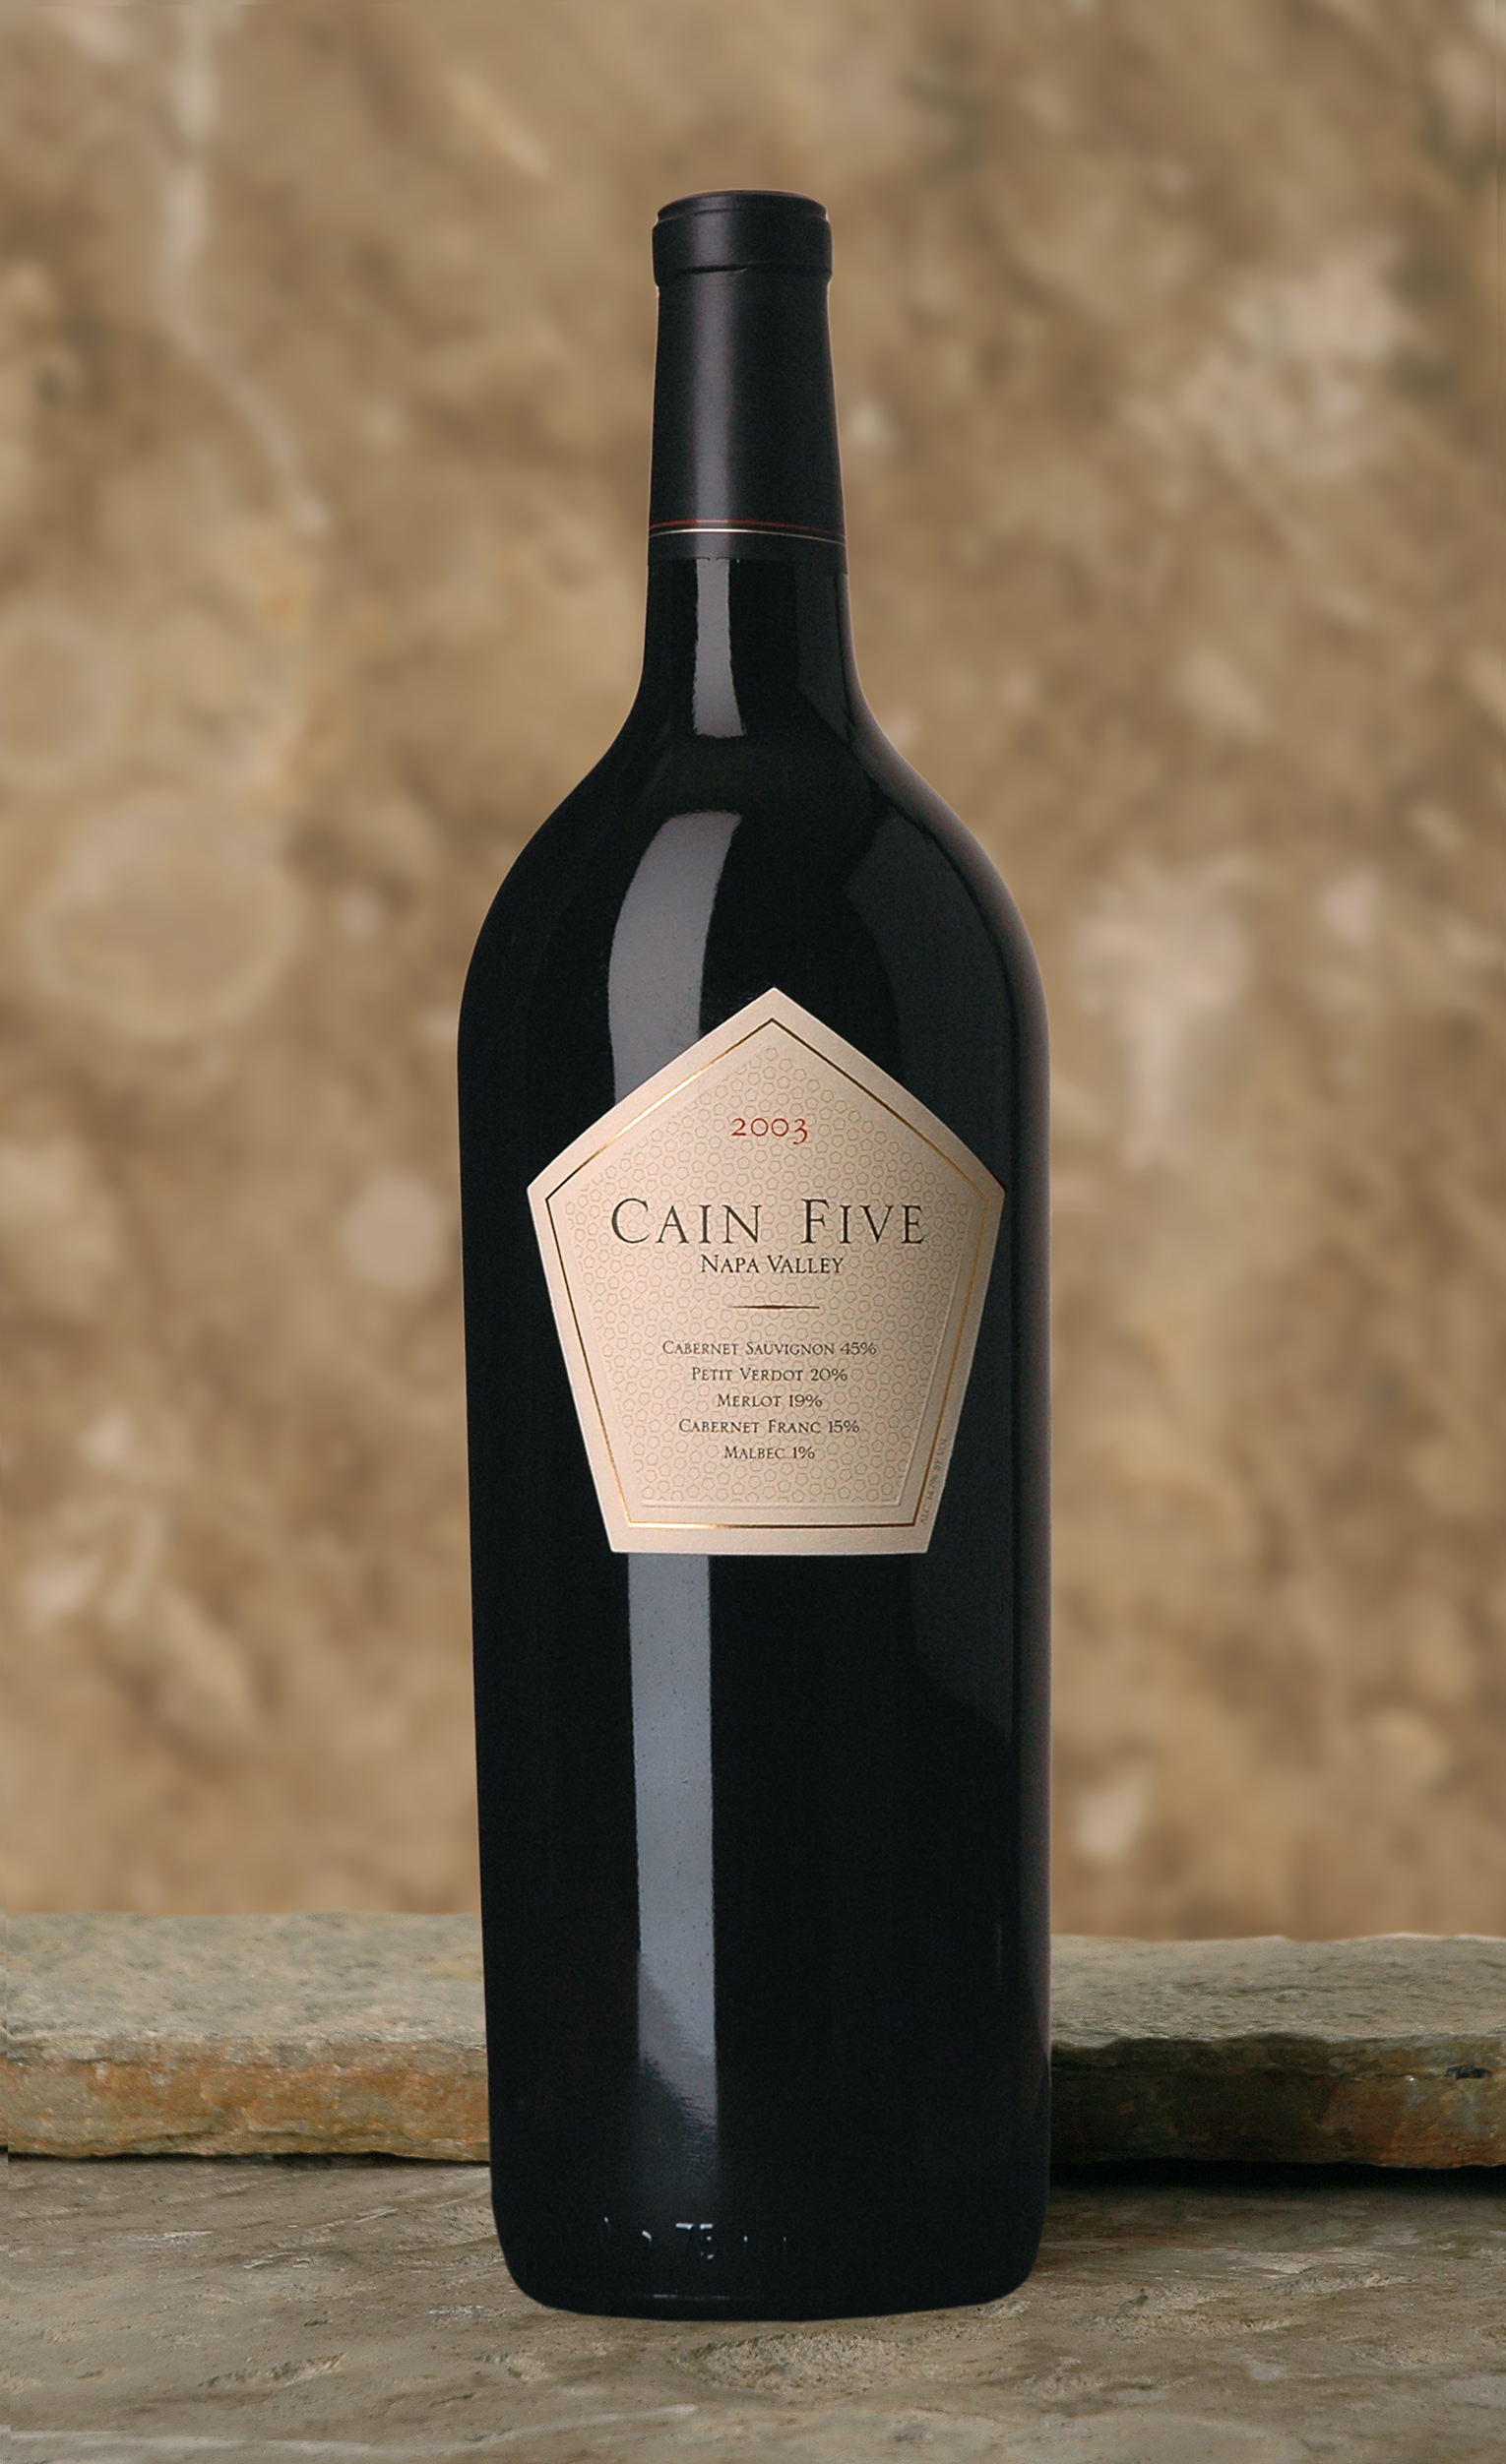 Cain Five, featured in Wine News